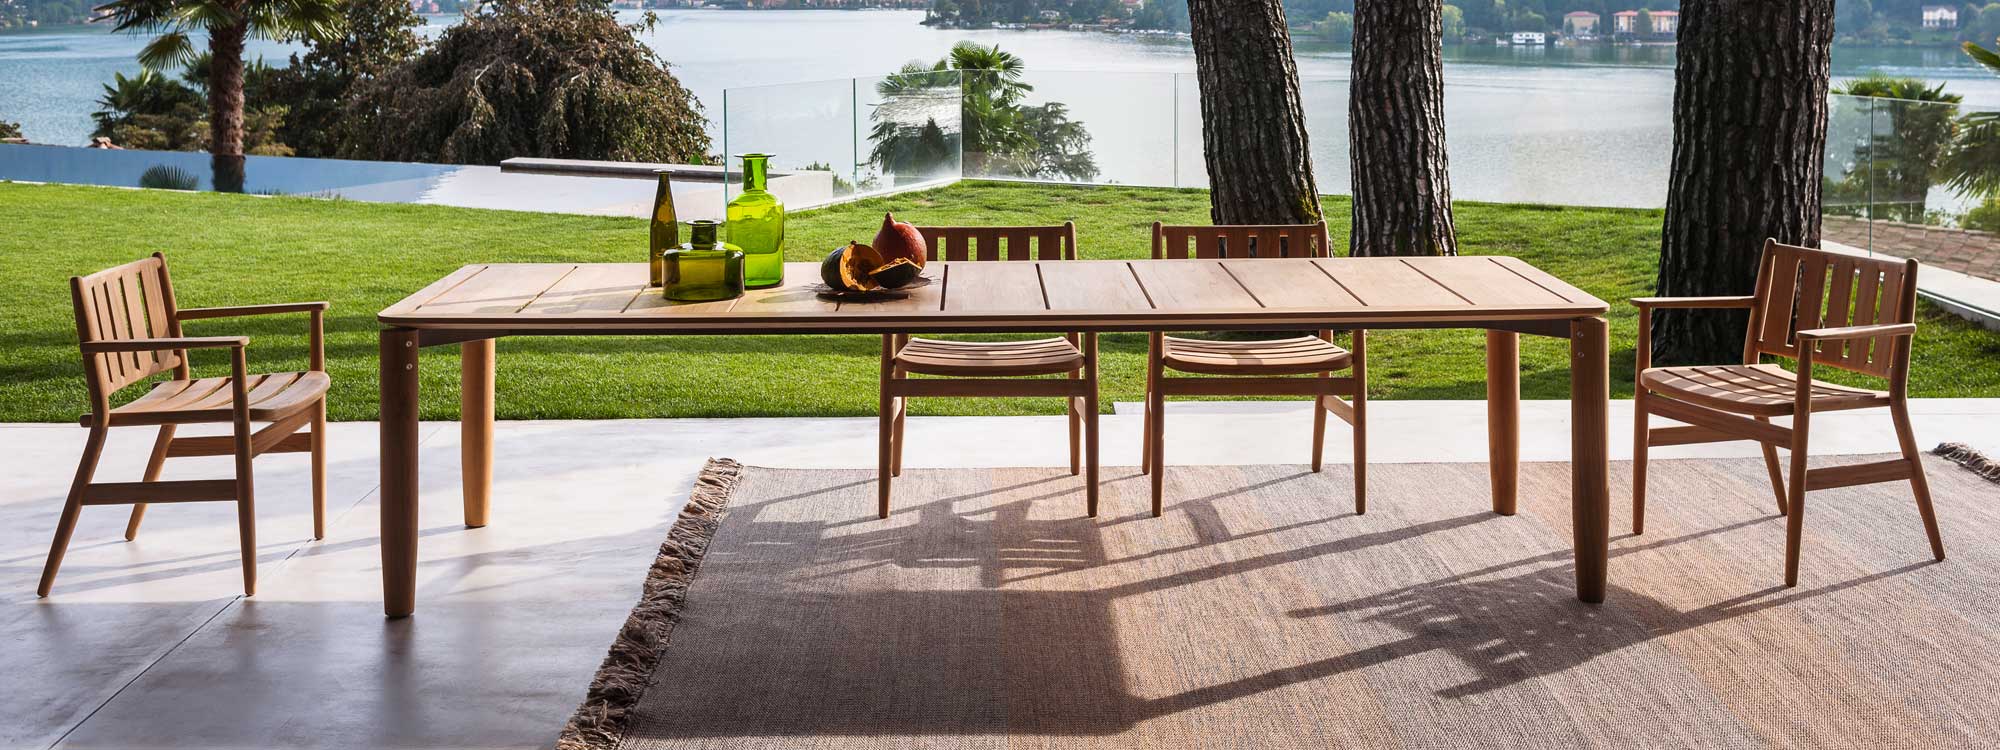 Image of large Levante teak dining table and chairs by Piero Lissono for RODA, shown on terrace with trees, lake and hills in background